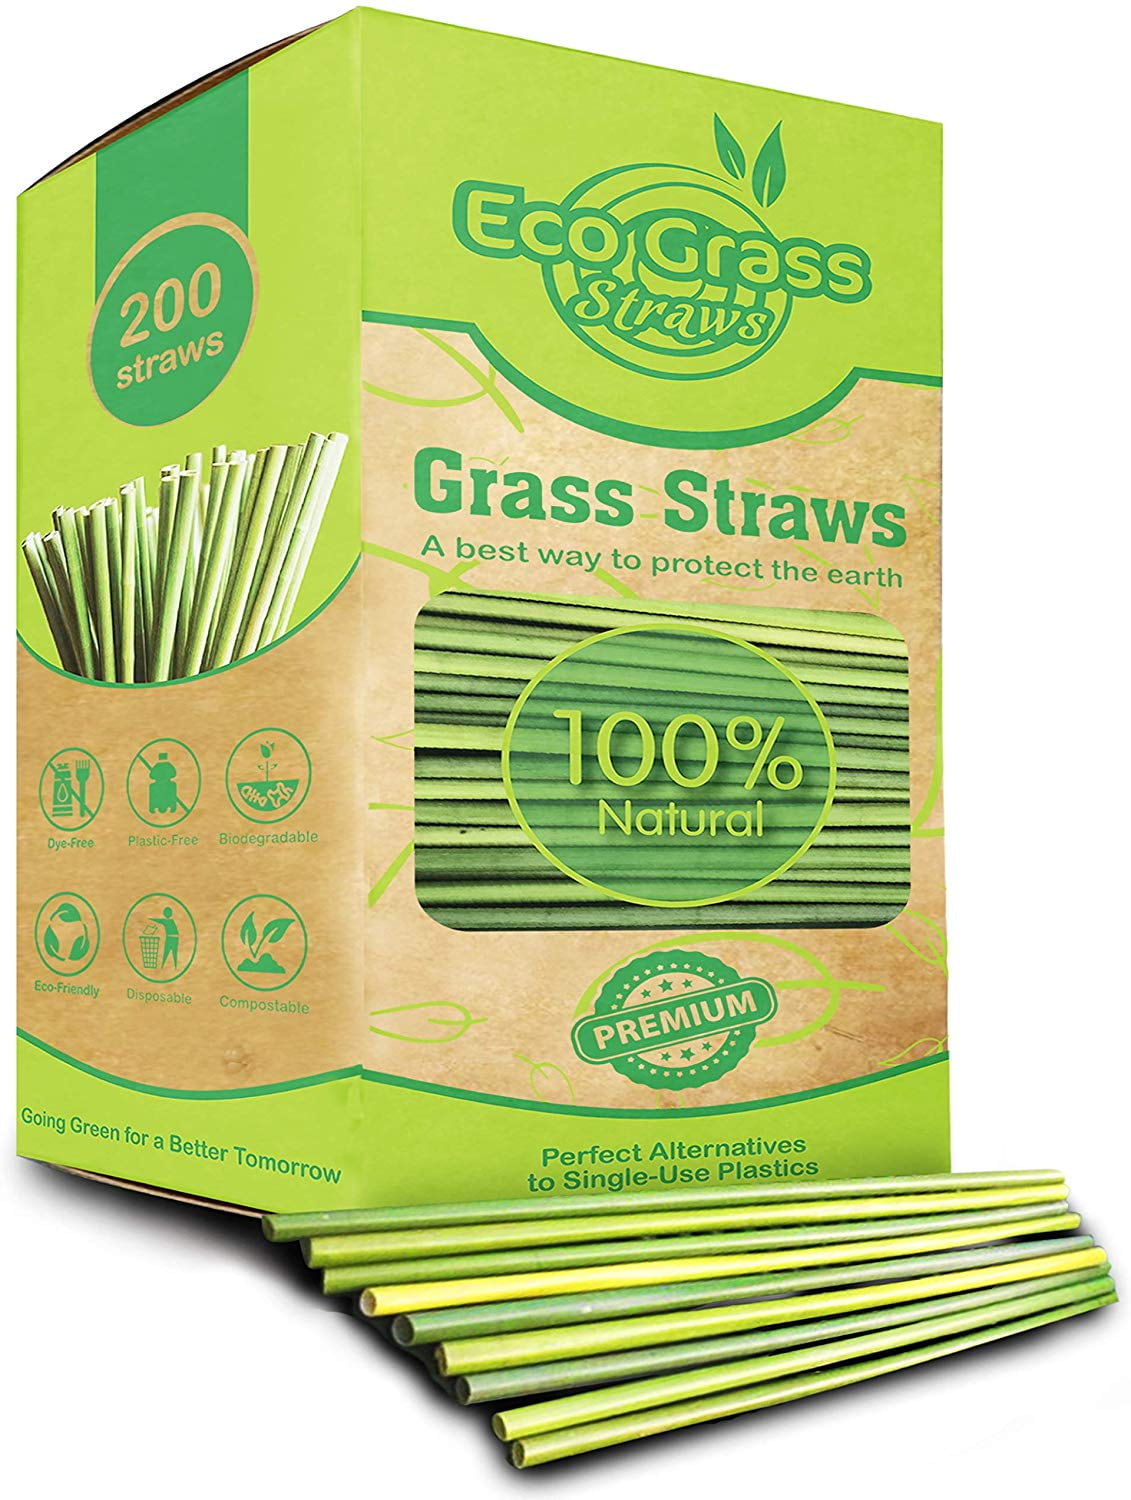 100pcs/ box Details about   Reuseable/ 100% Eco grass straw/ Friendly environment straw 